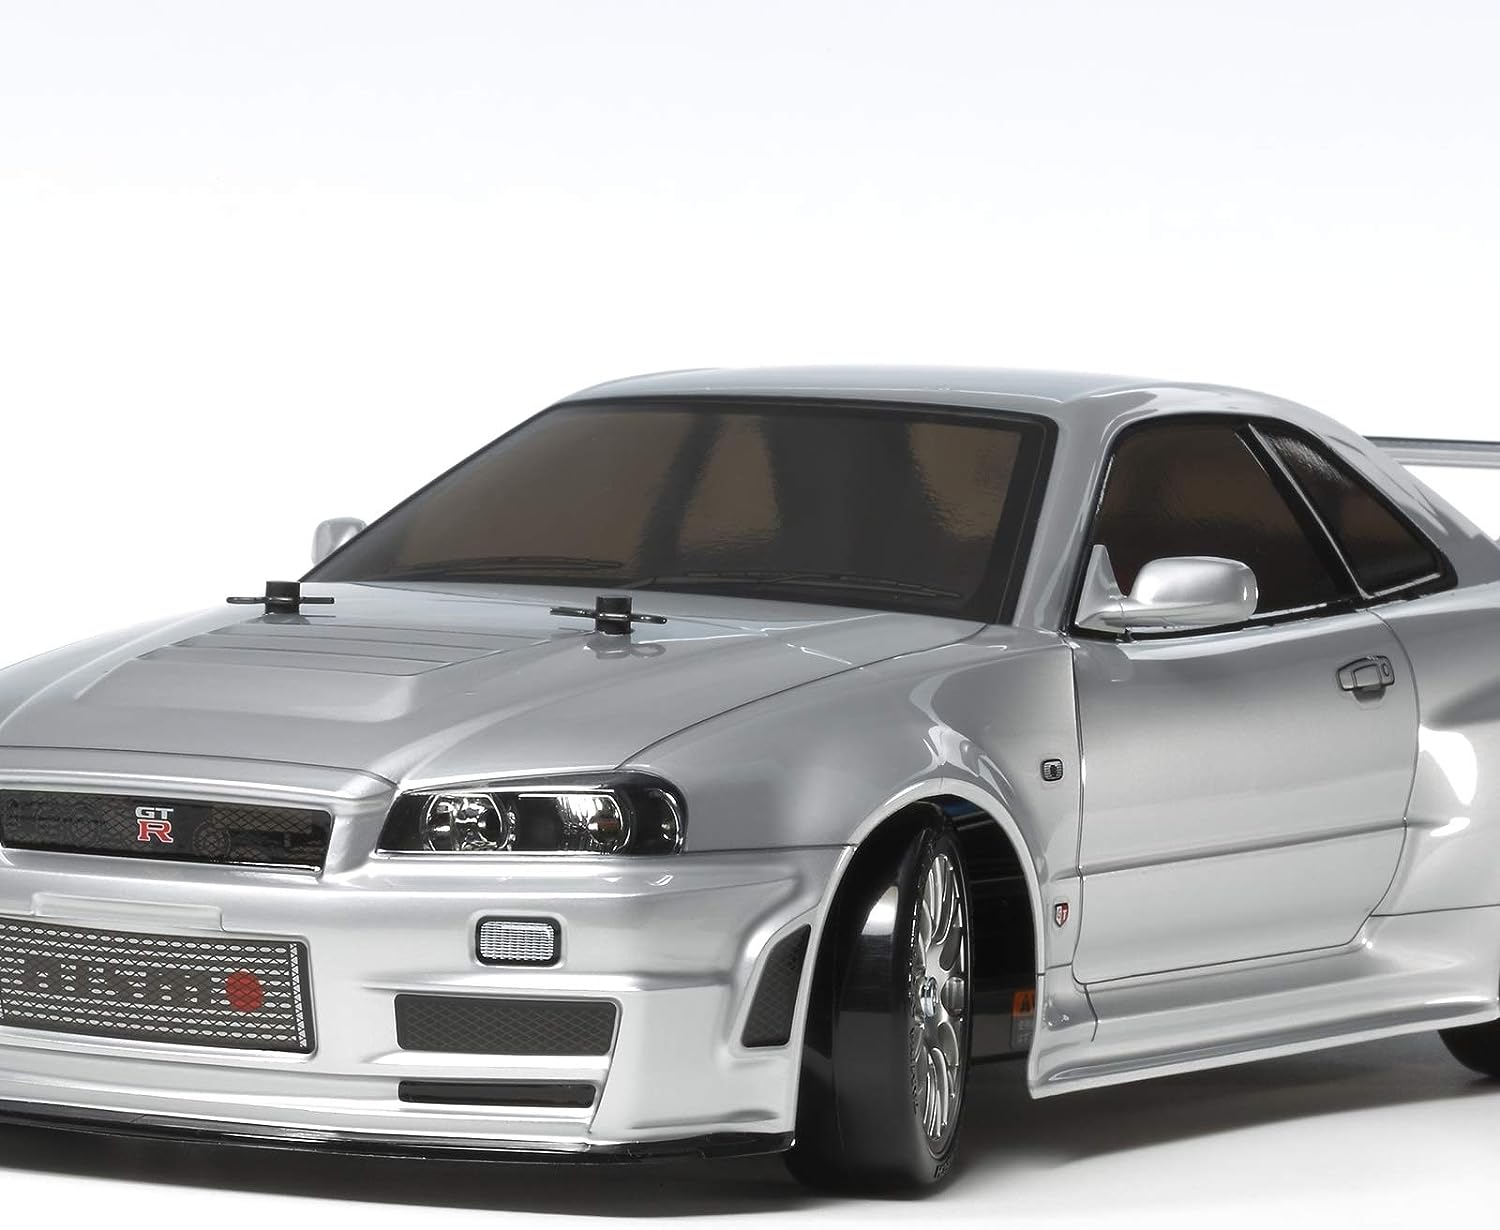 TAMIYA RC Nismo R34 GT-R Z-Tune Review